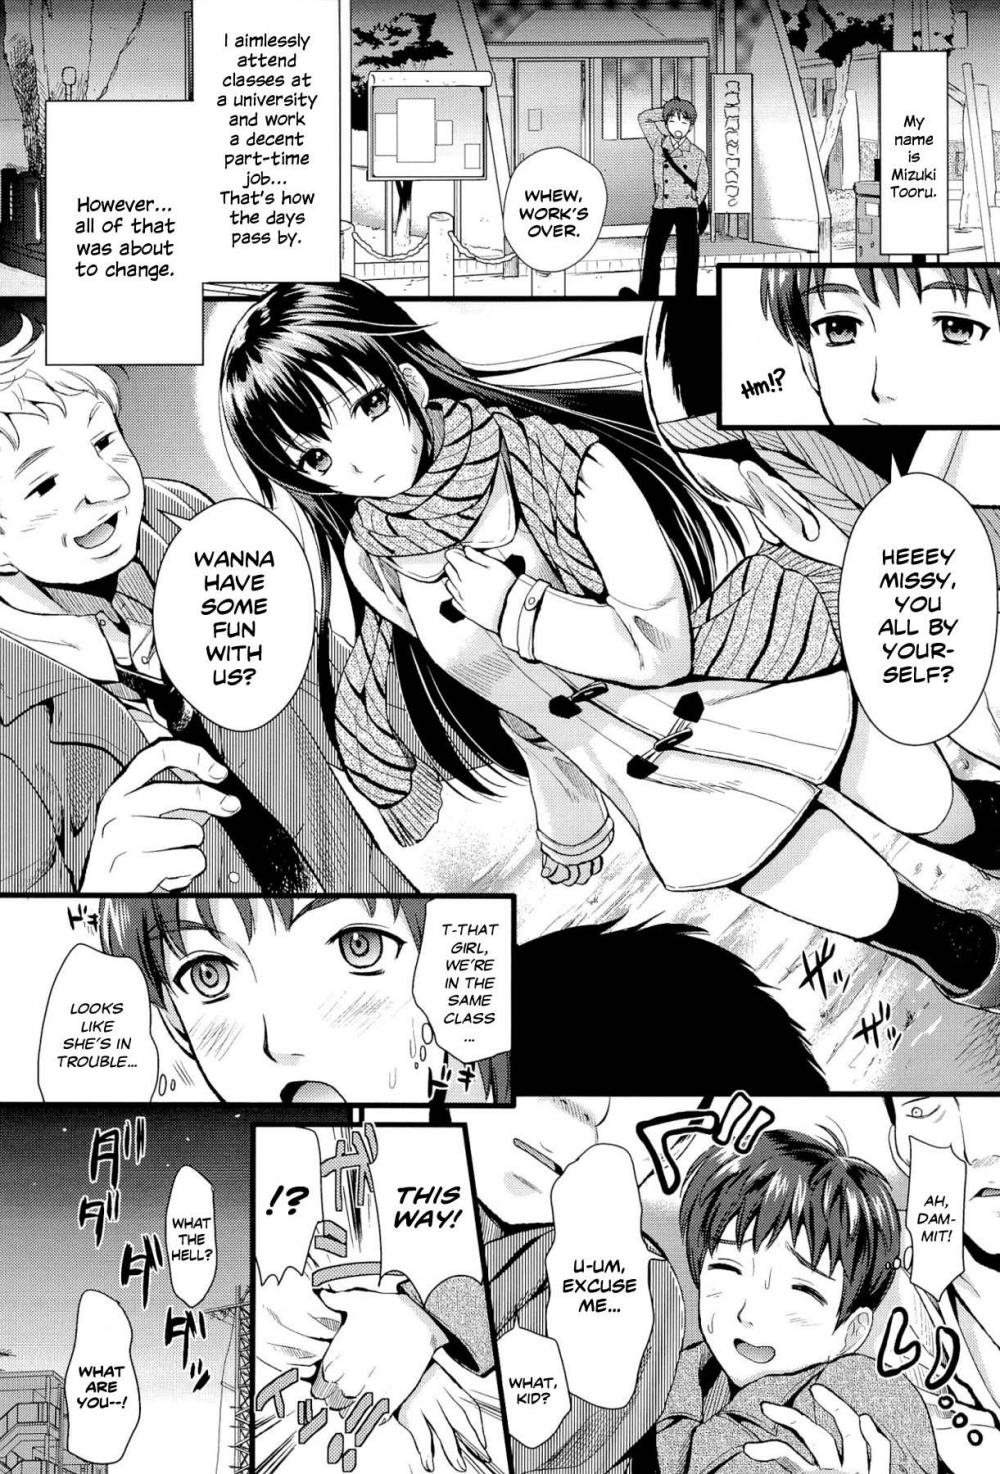 Hentai Manga Comic-His and Hers Master-Servant Relationship-Chapter 2-1